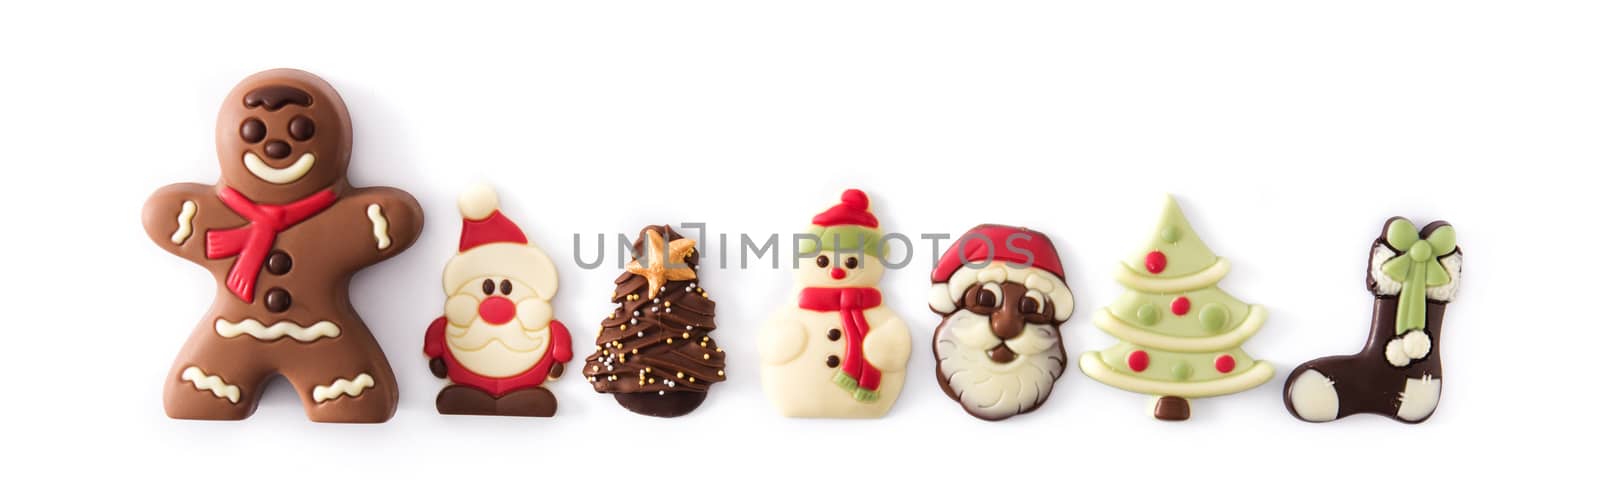 Assortment of Christmas chocolate bonbons by chandlervid85